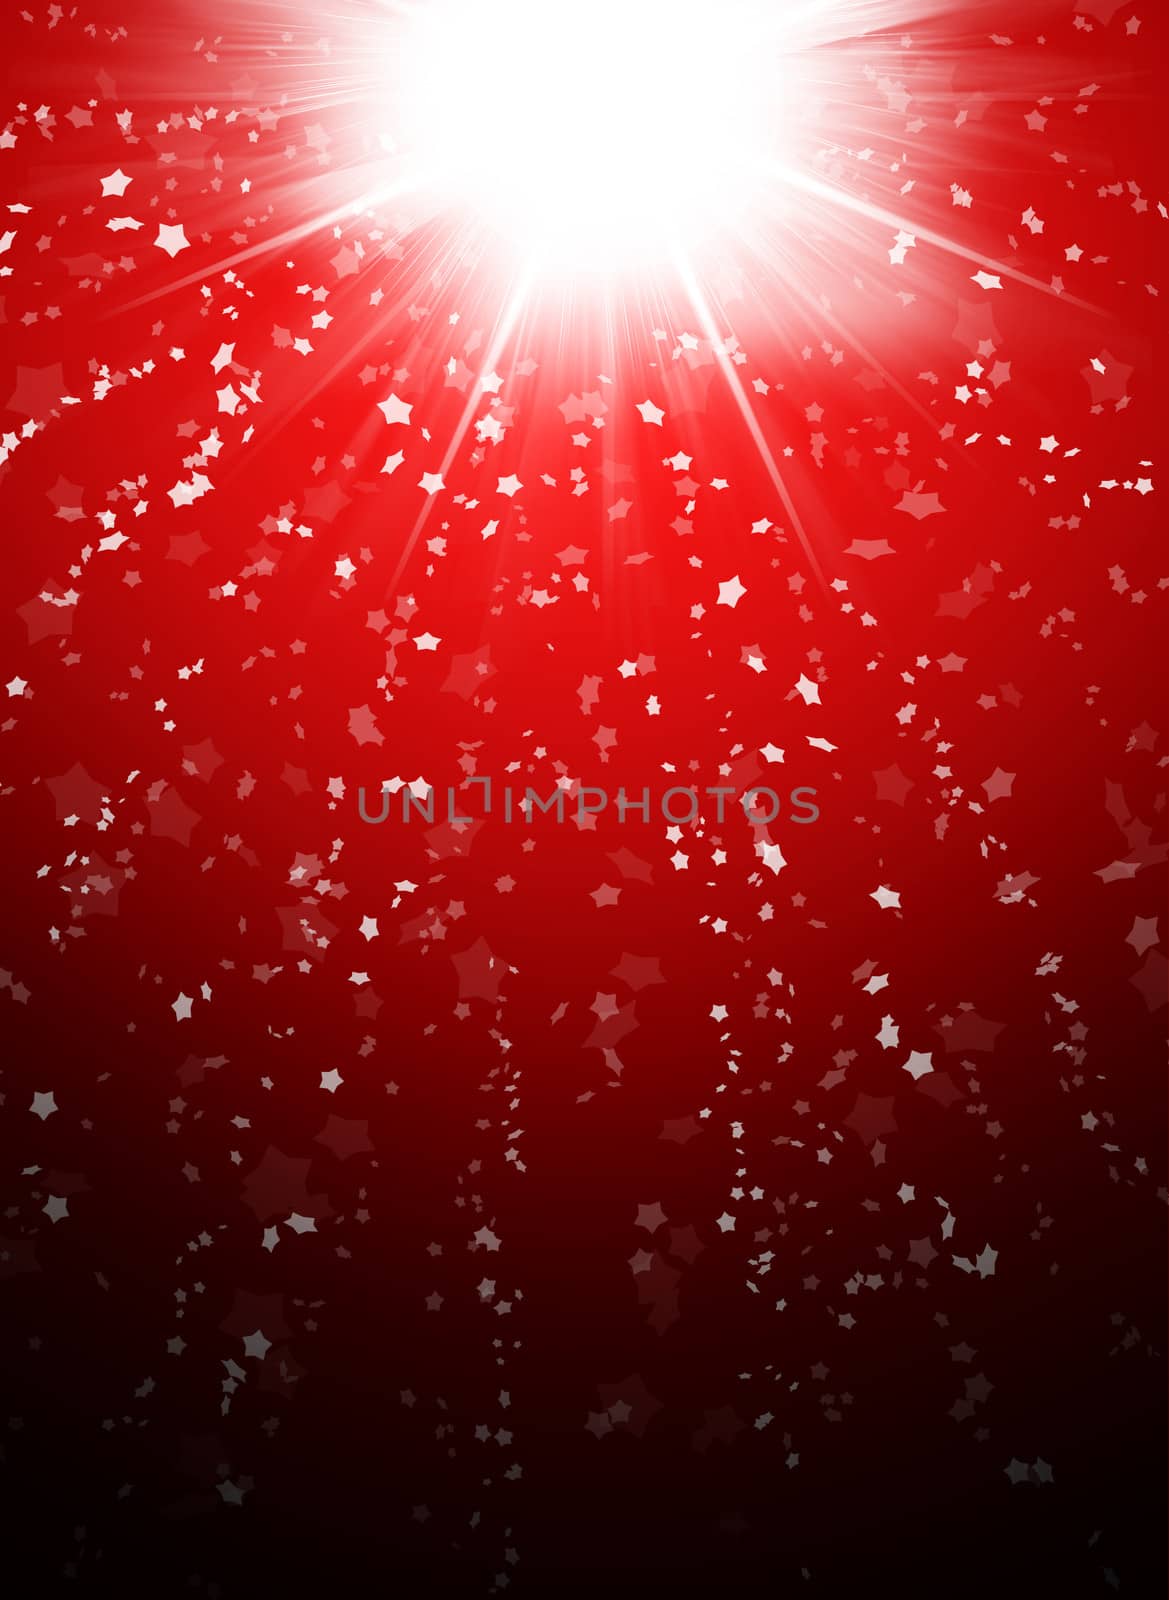 New Year's background. Snowflakes on abstract red background